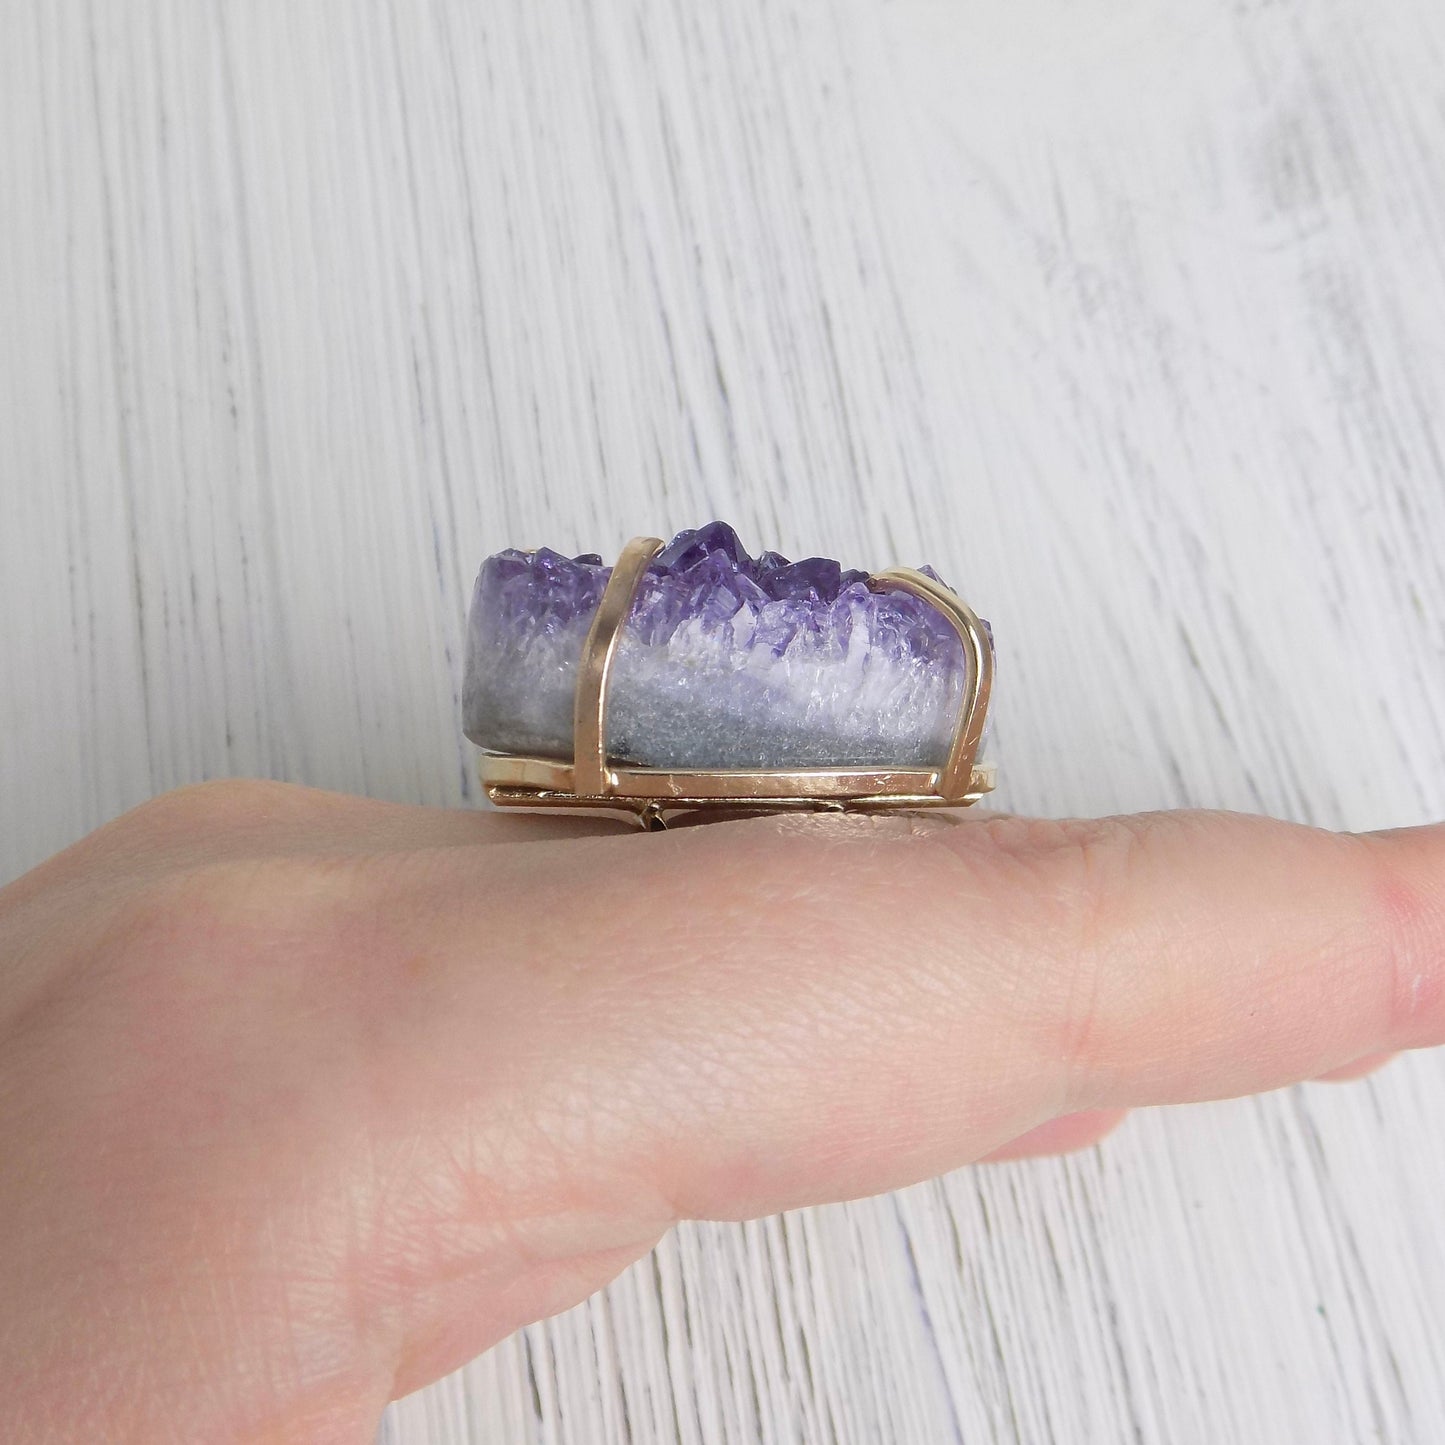 Amethyst Ring Gold, Purple Druzy Ring, Raw Amethyst Ring, Large Crystal Gemstone Ring, Statement Jewelry, Gift For Her, G14-48